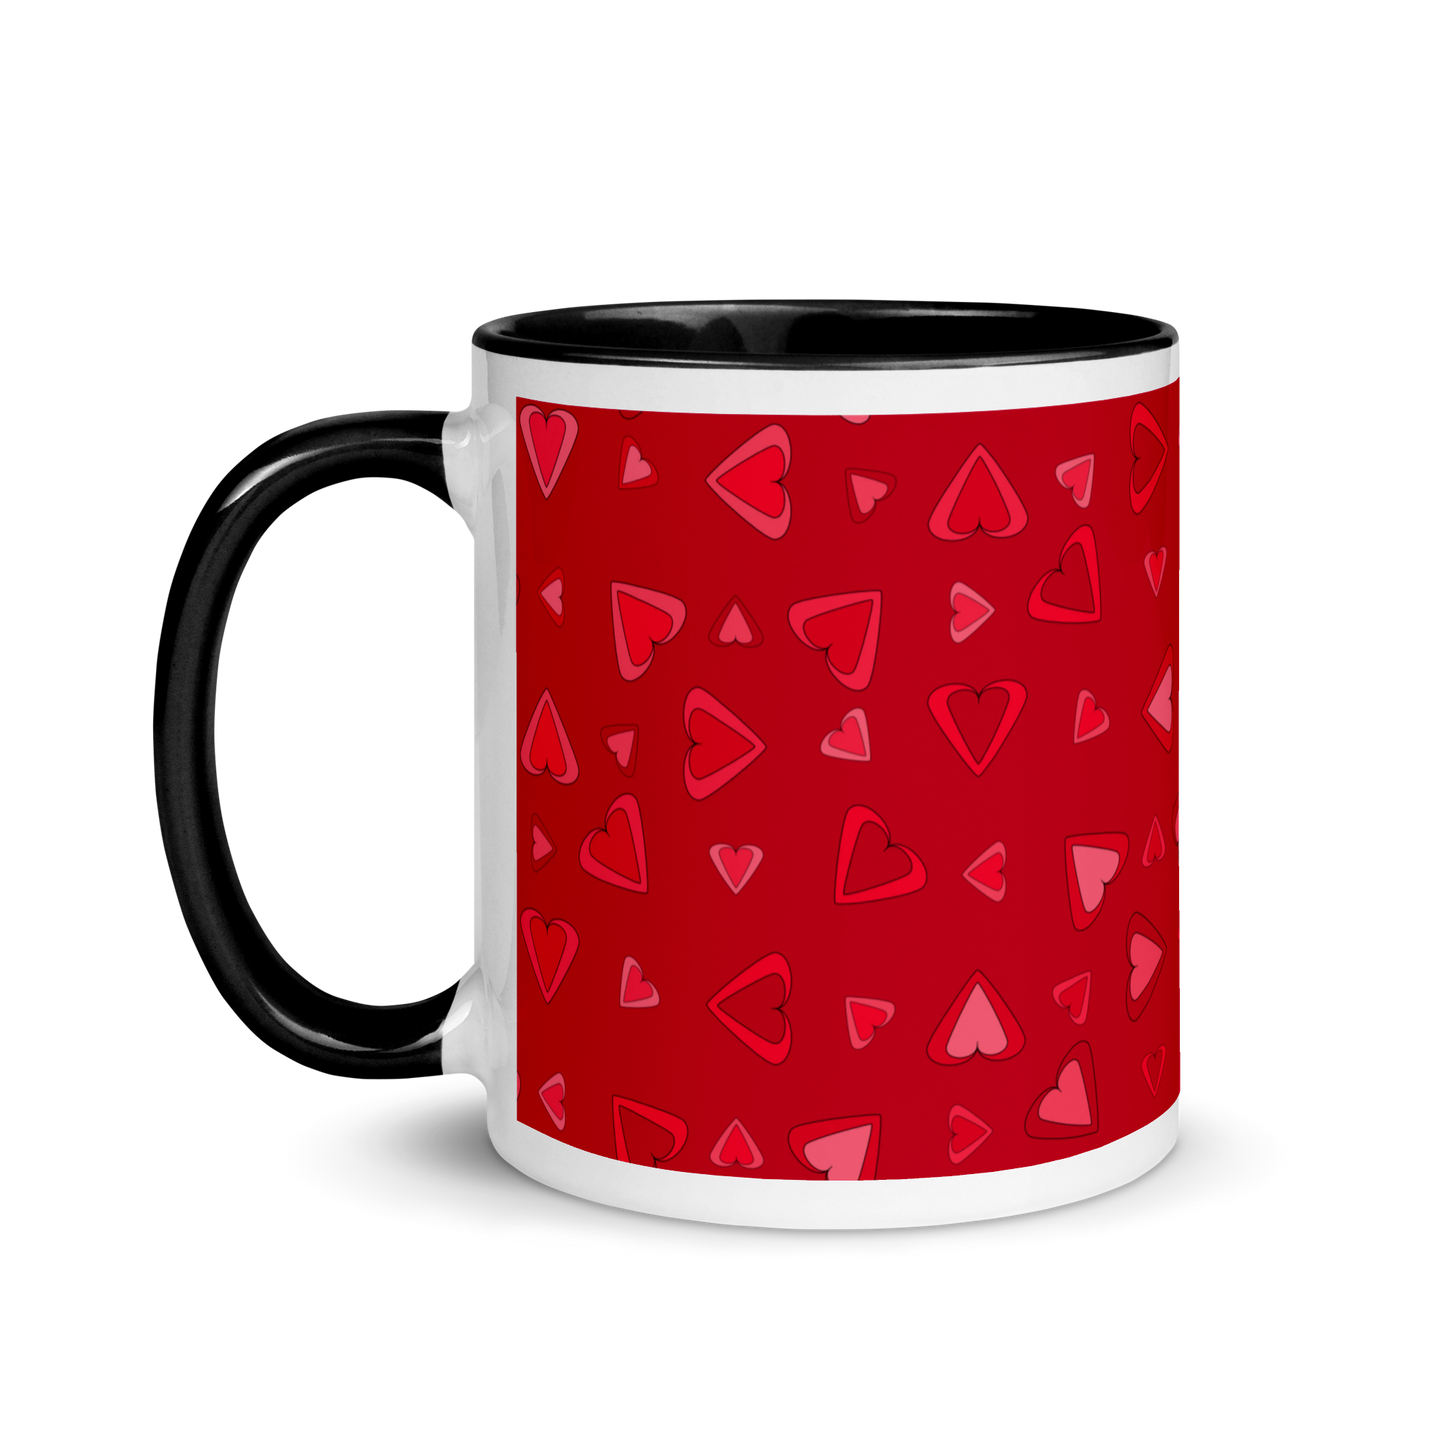 Rainbow Of Hearts | Batch 01 | Seamless Patterns | White Ceramic Mug with Color Inside - #11